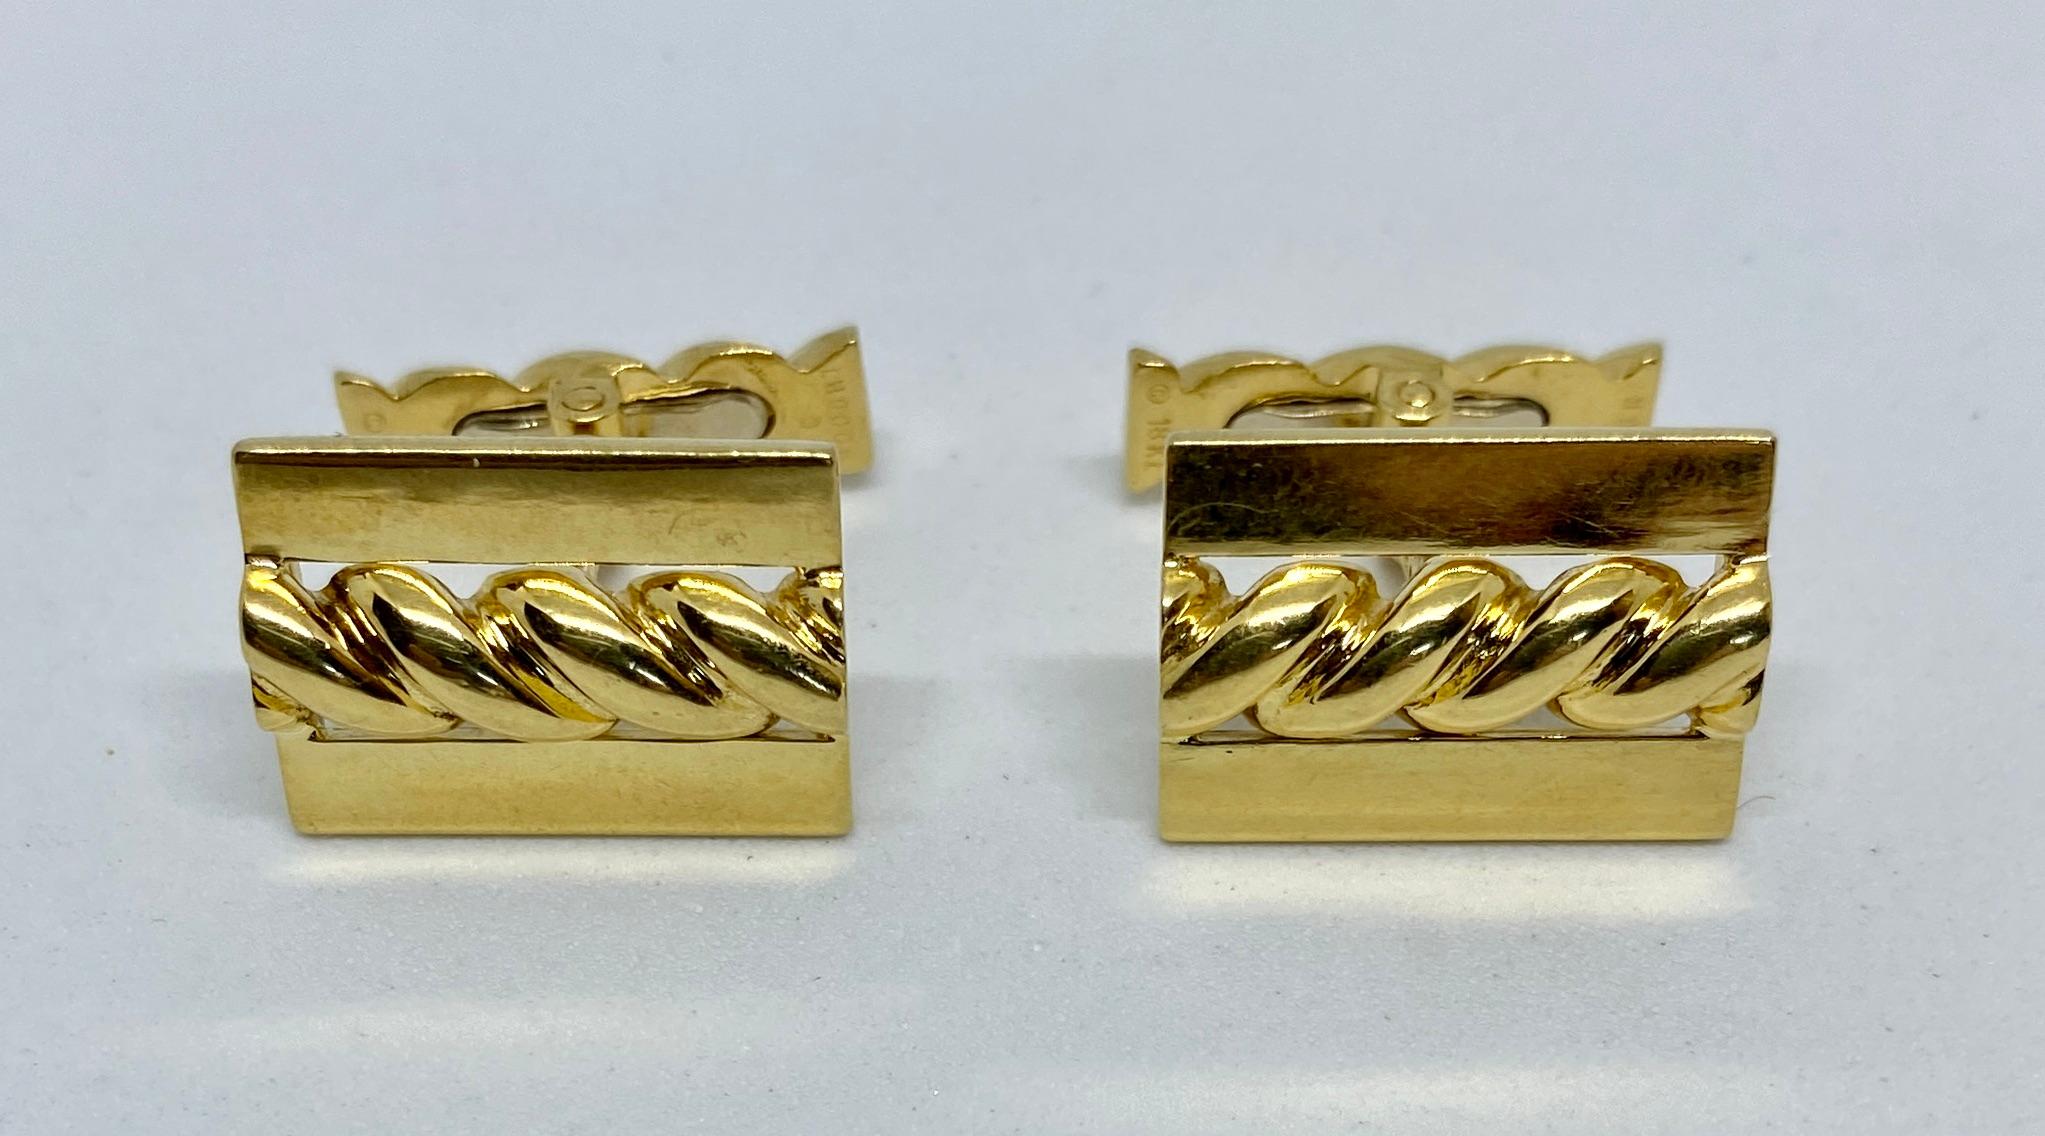 Reminiscent of fusilli (corkscrew) pasta, these cufflinks in 18K yellow gold by Van Cleef & Arpels are handsome, charming and versatile. While cufflinks in this design are rare, the 